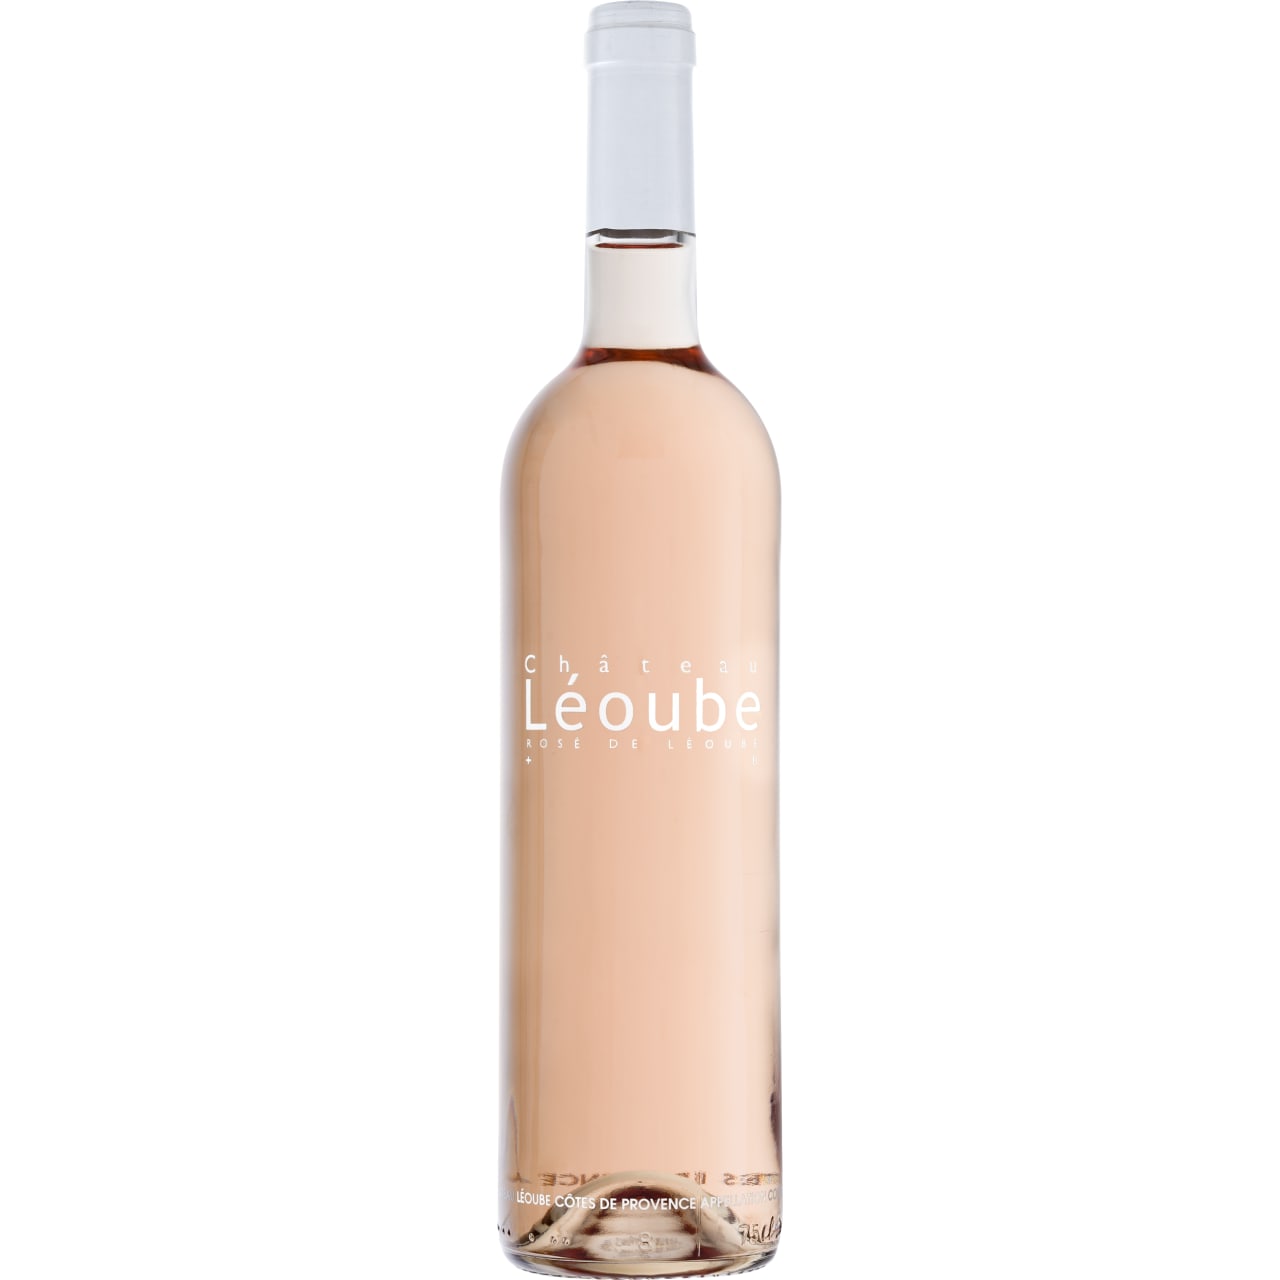 There's a lovely freshness reminiscent of white fleshy fruit, that combines with the delicate red and dried fruits with a hint of spices. This is a drinkable and elegant style of rosé.